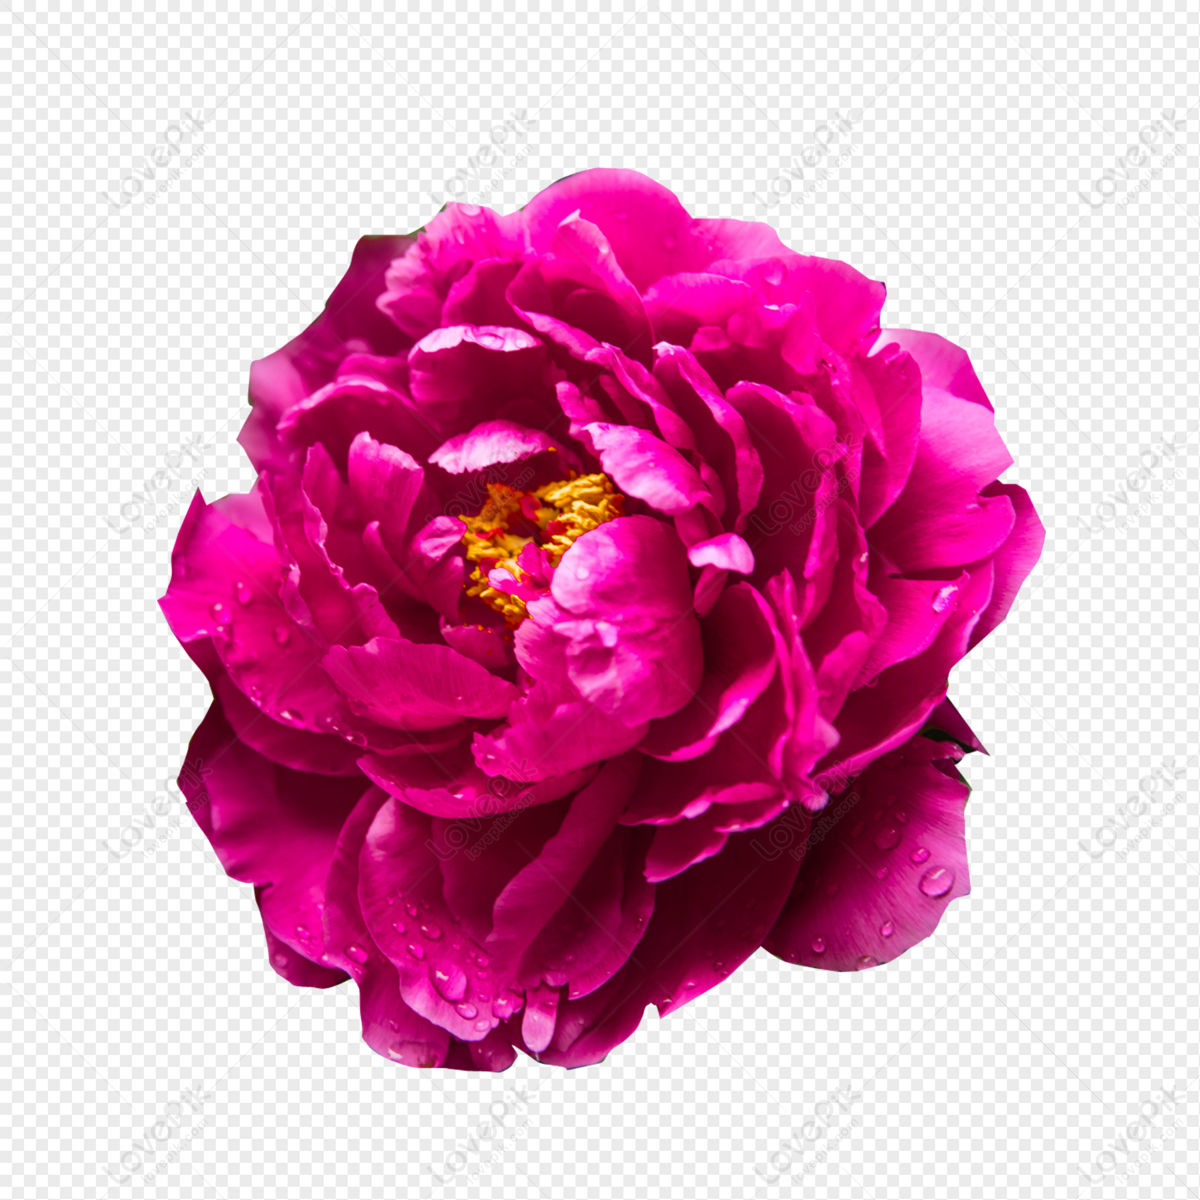 Peony Flower PNG Image Free Download And Clipart Image For Free Download -  Lovepik | 401238091